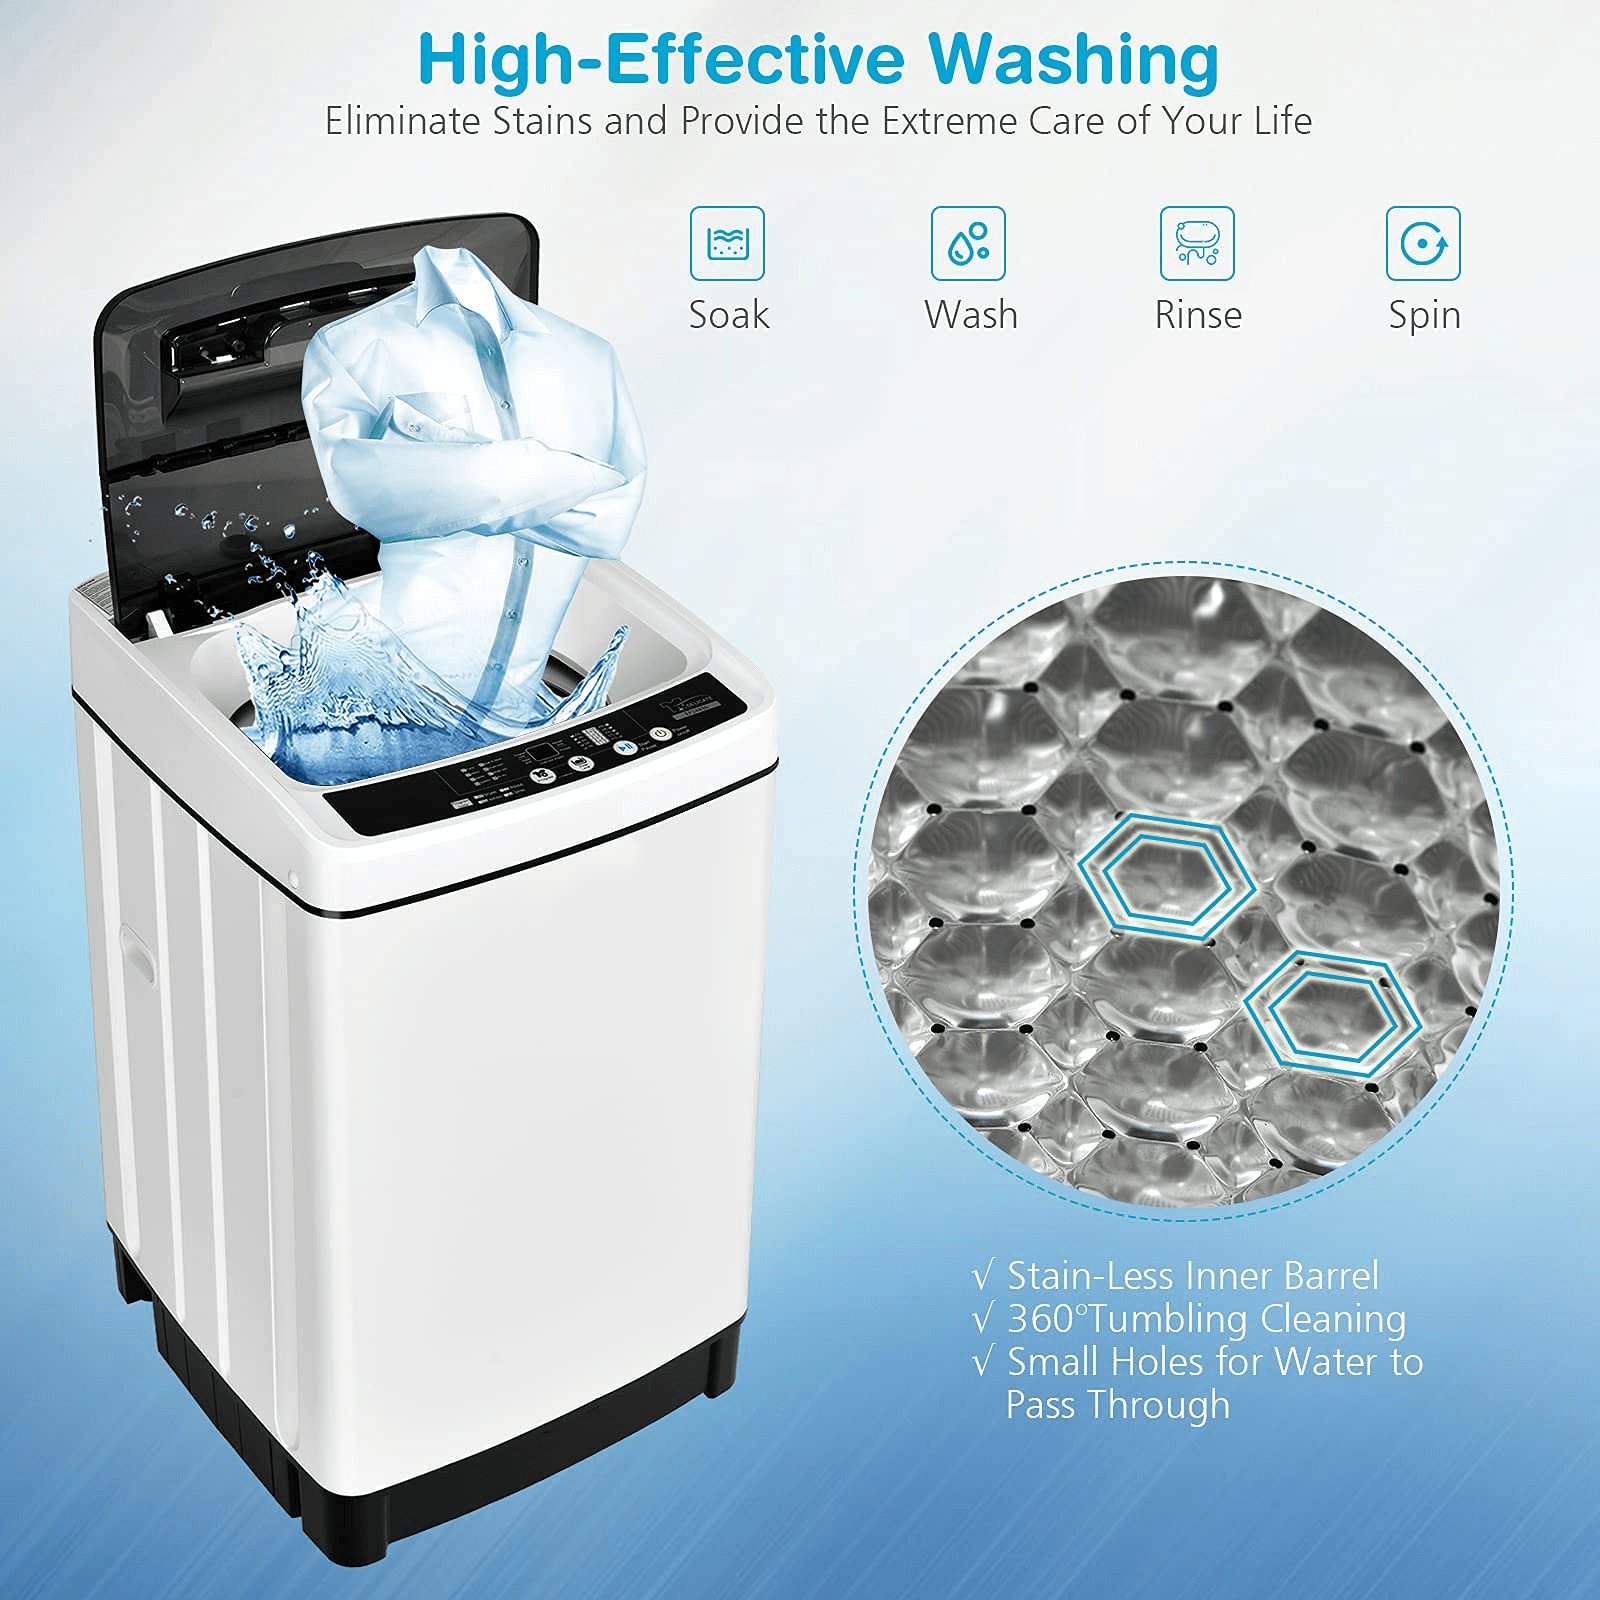 Giantex Full Automatic Washing Machine, 2 in 1 Portable Laundry Washer 1.5Cu.Ft 11lbs Capacity Washer and Spinner Combo